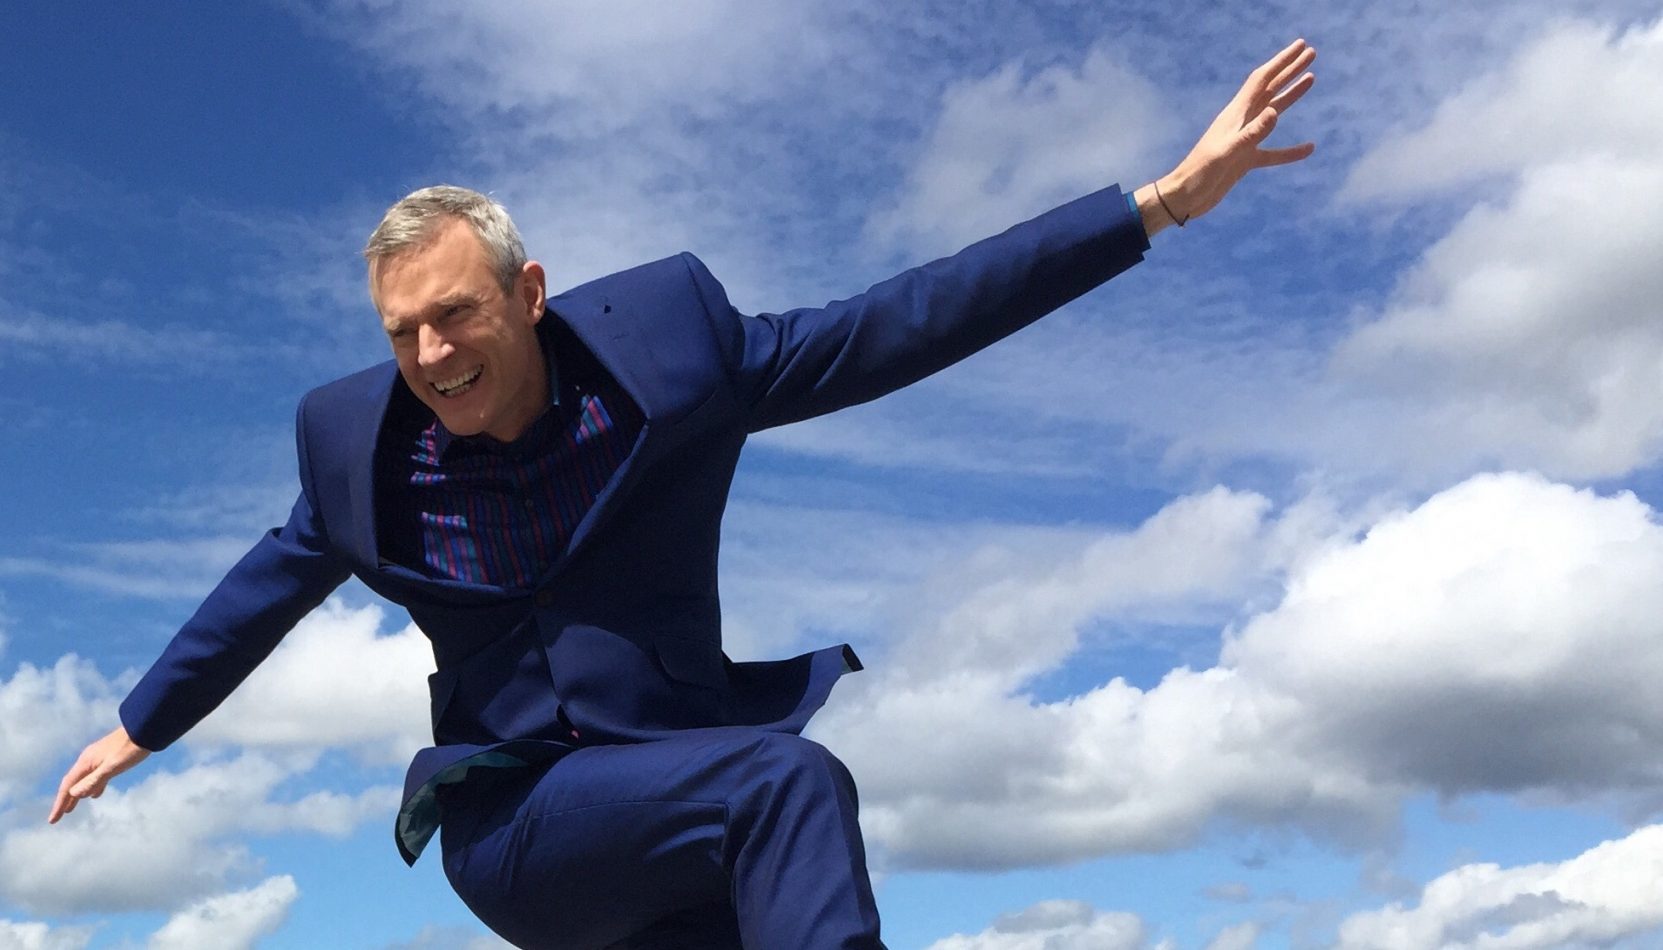 TALKING TO JEREMY VINE, INTERVIEW, SURREY, GUIDETO, ENTERTAINMENT, WHATS ON, WHERE TO GO, AN EVENING WITH JEREMY VINE, FARNHAM MALTINGS, FARNHAM, SURREY